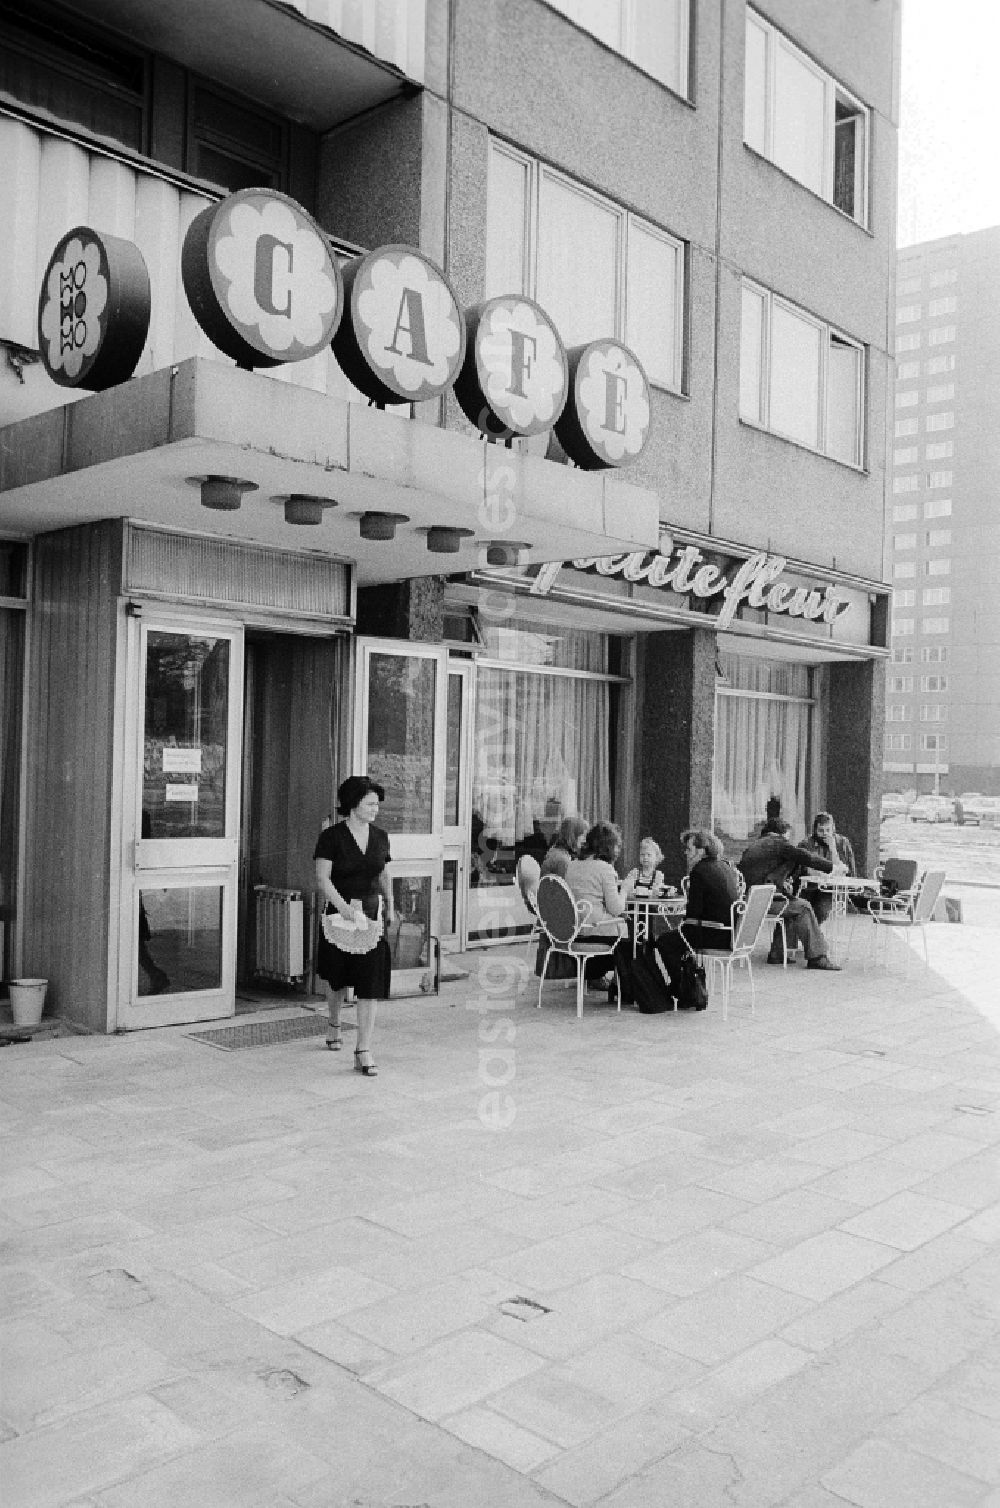 GDR image archive: Berlin - The cafe petite fleur the HO (trading organisation) in the Frankfurt avenue in Berlin, the former capital of the GDR, German democratic republic